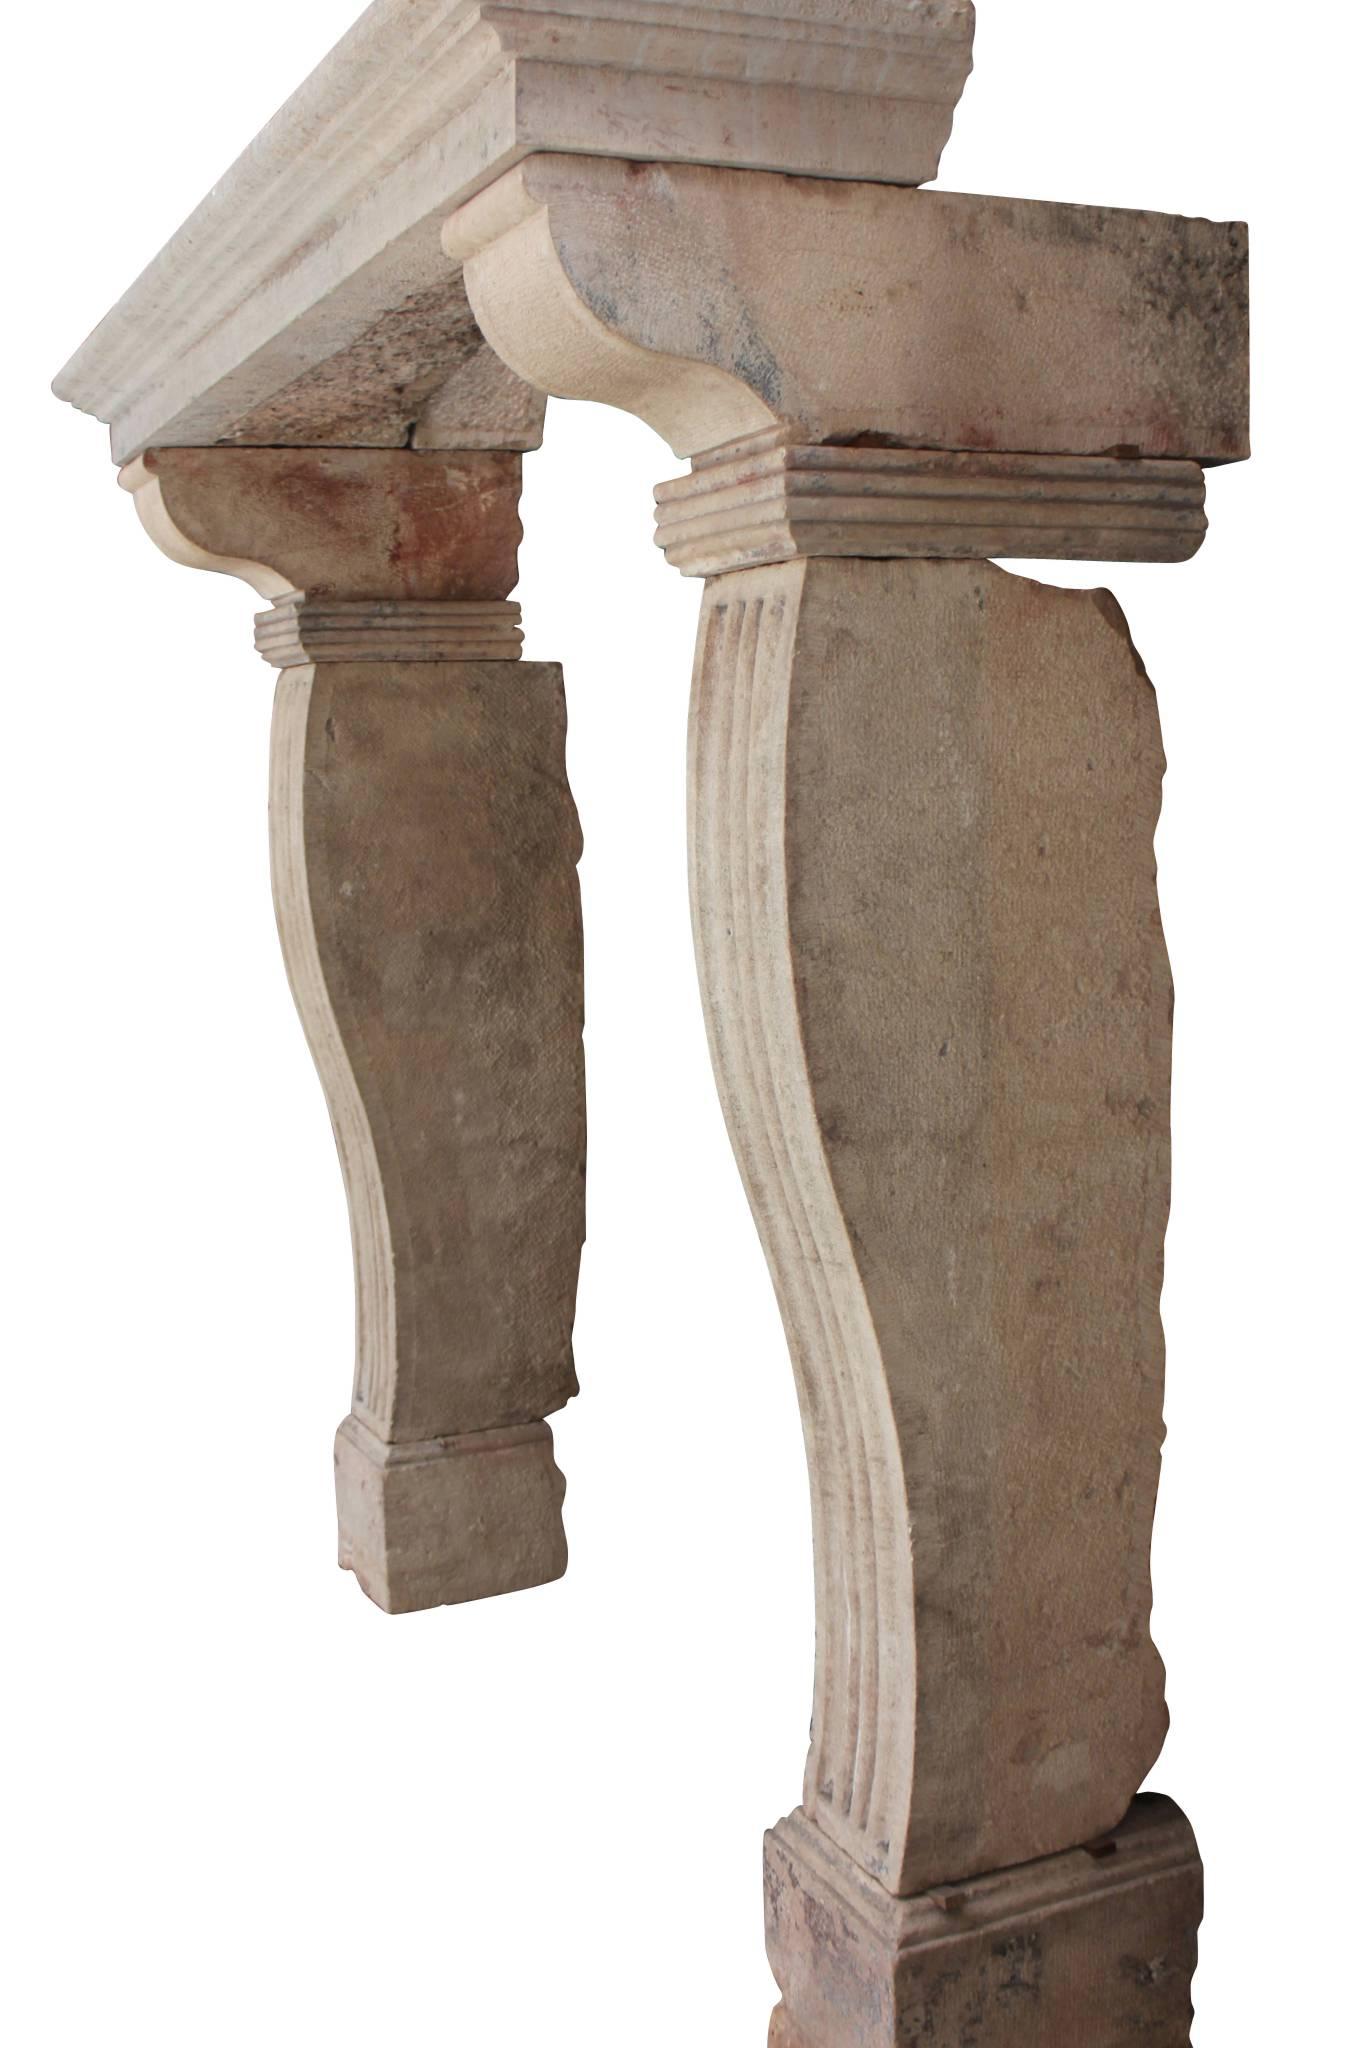 This is a high hard stone antique fireplace mantle.

Measures:
188 cm EW 74.01